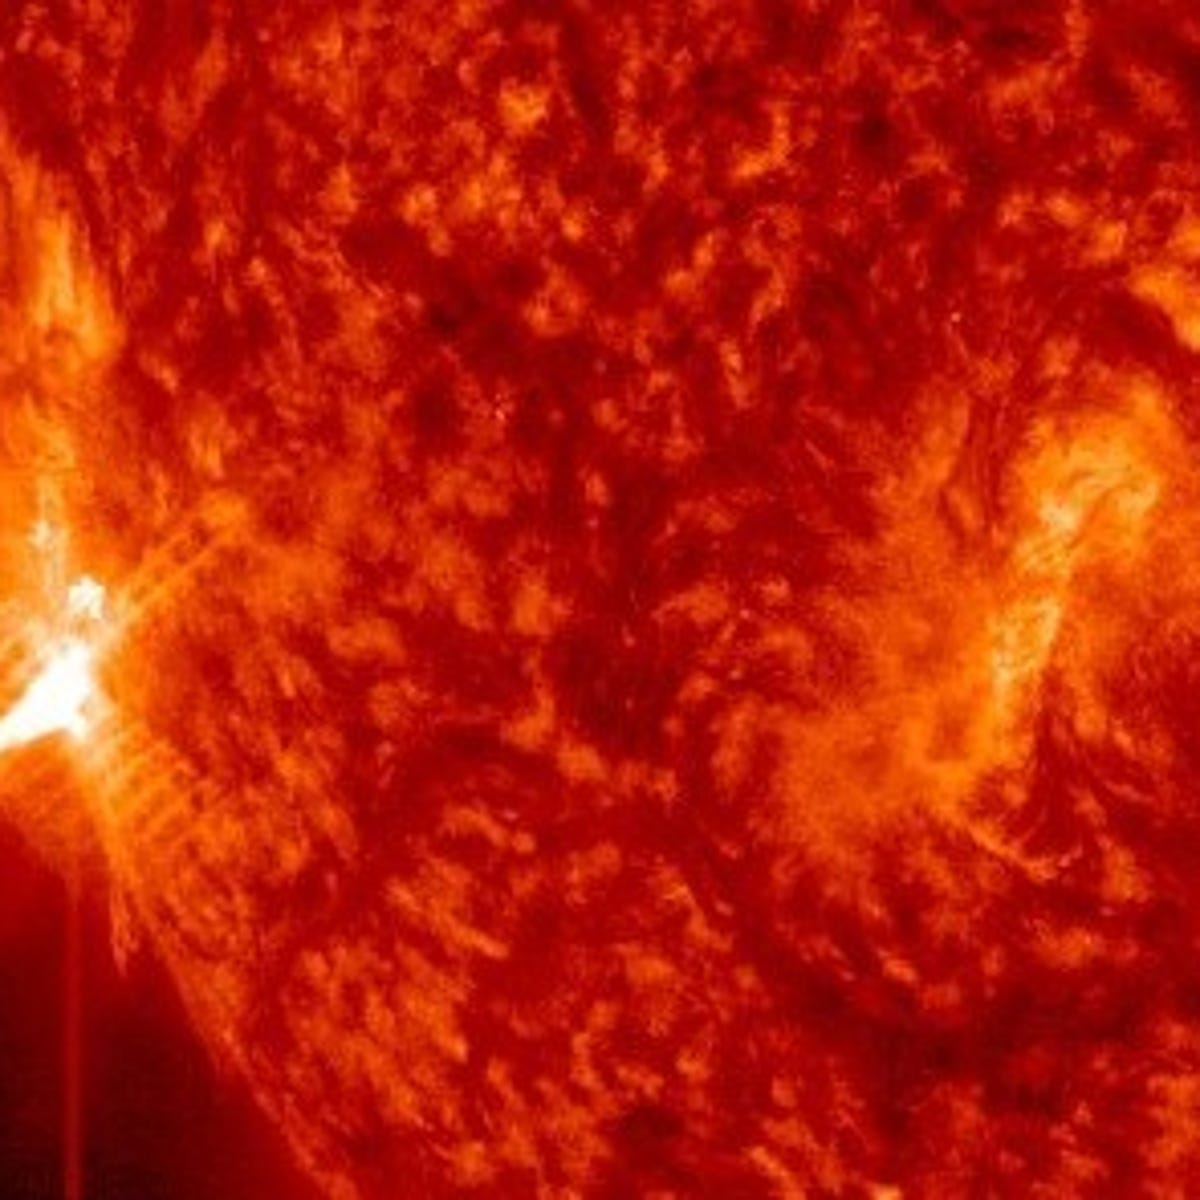 Sun Unleashes Intense X-Class Solar Flare, With More Blasts Expected - CNET